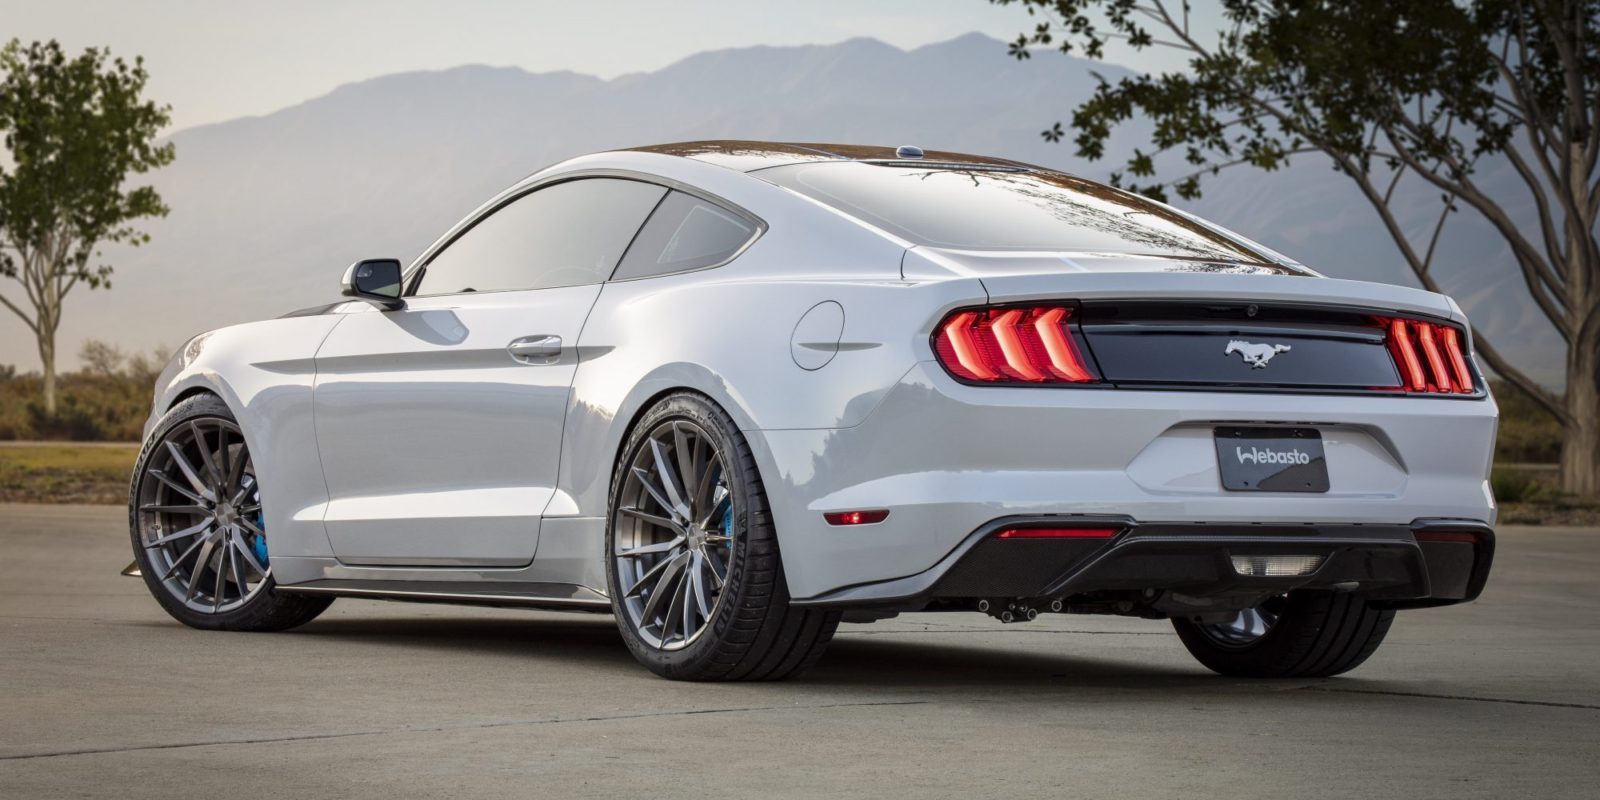 Second Electric Mustang Model Makes Its Debut